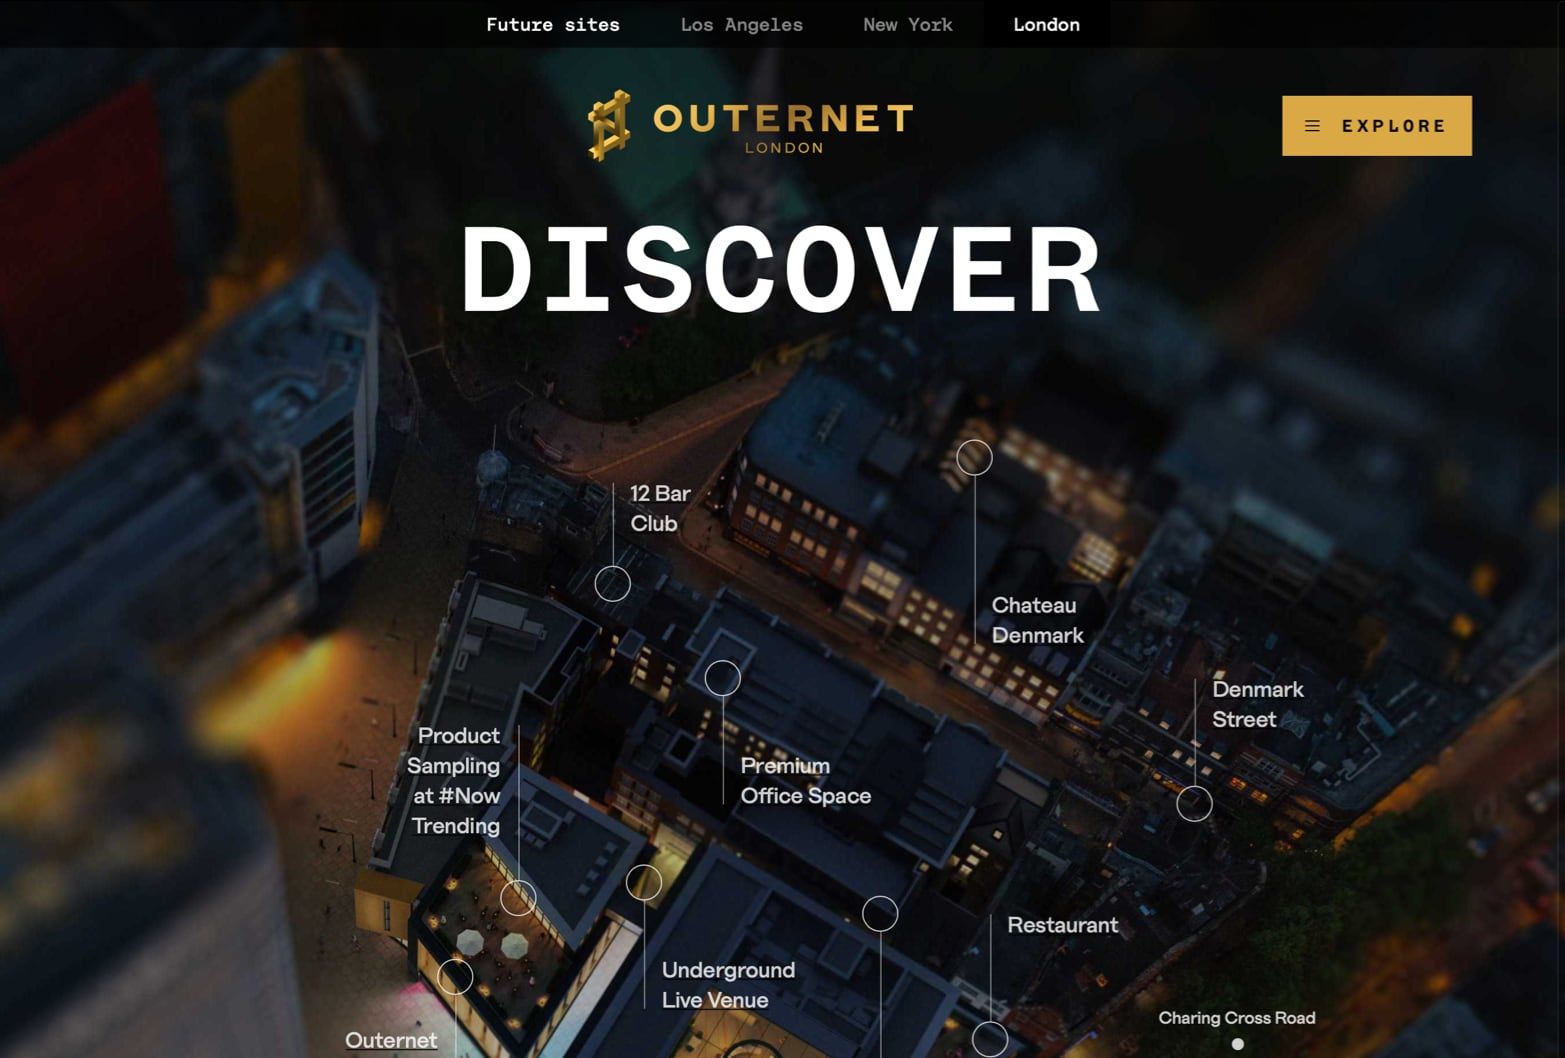 "Discover" page on the Outernet website